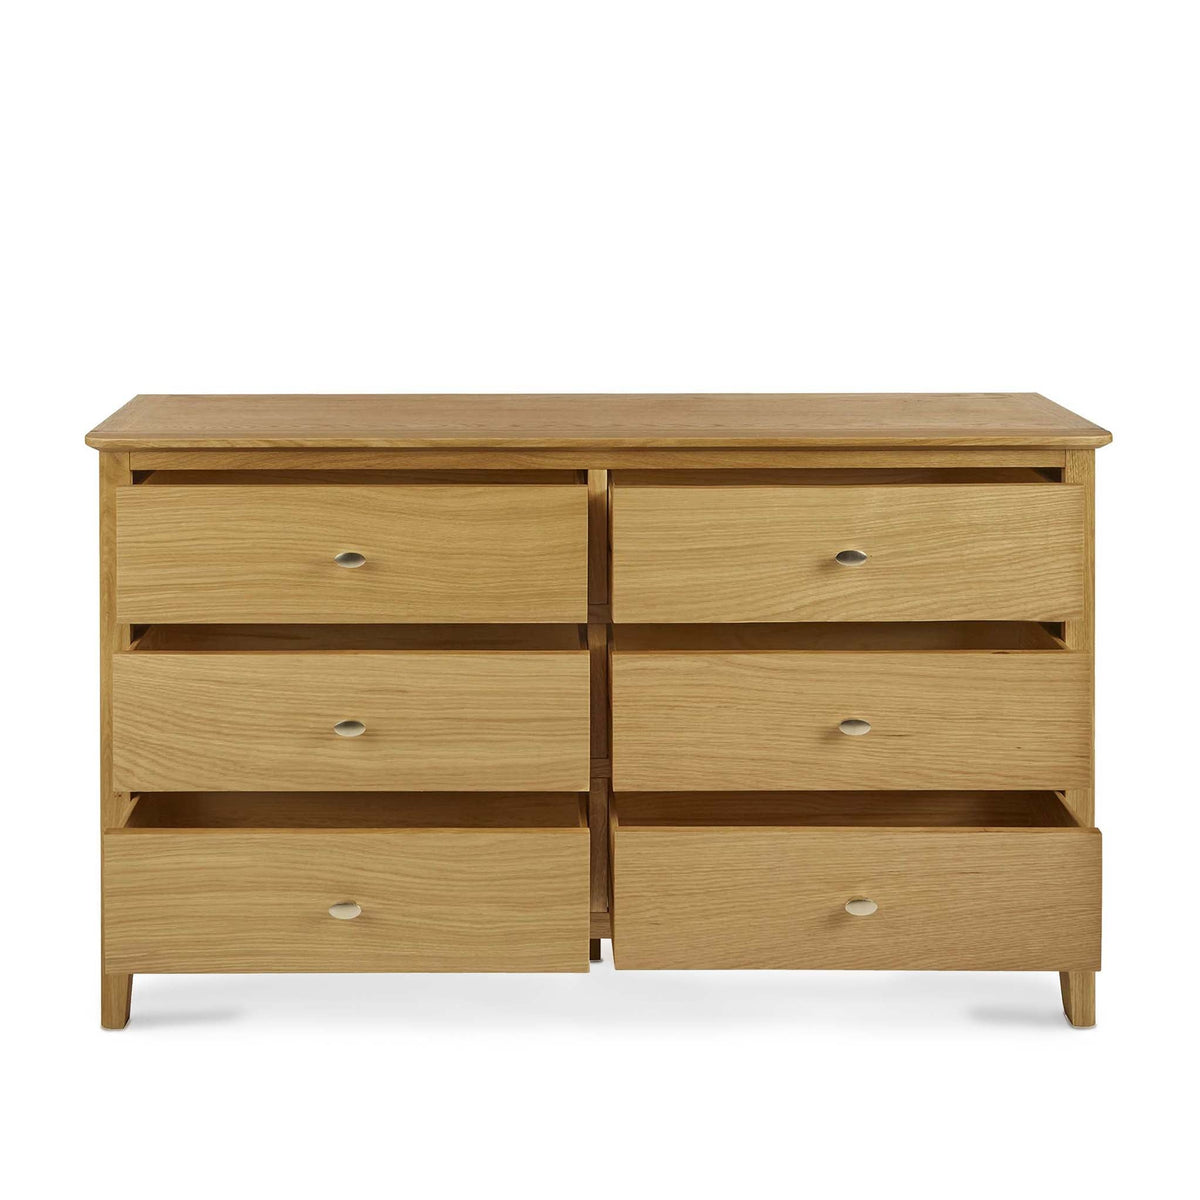 Alba Oak 6 Drawer Chest of Drawers - Front view with Drawers open